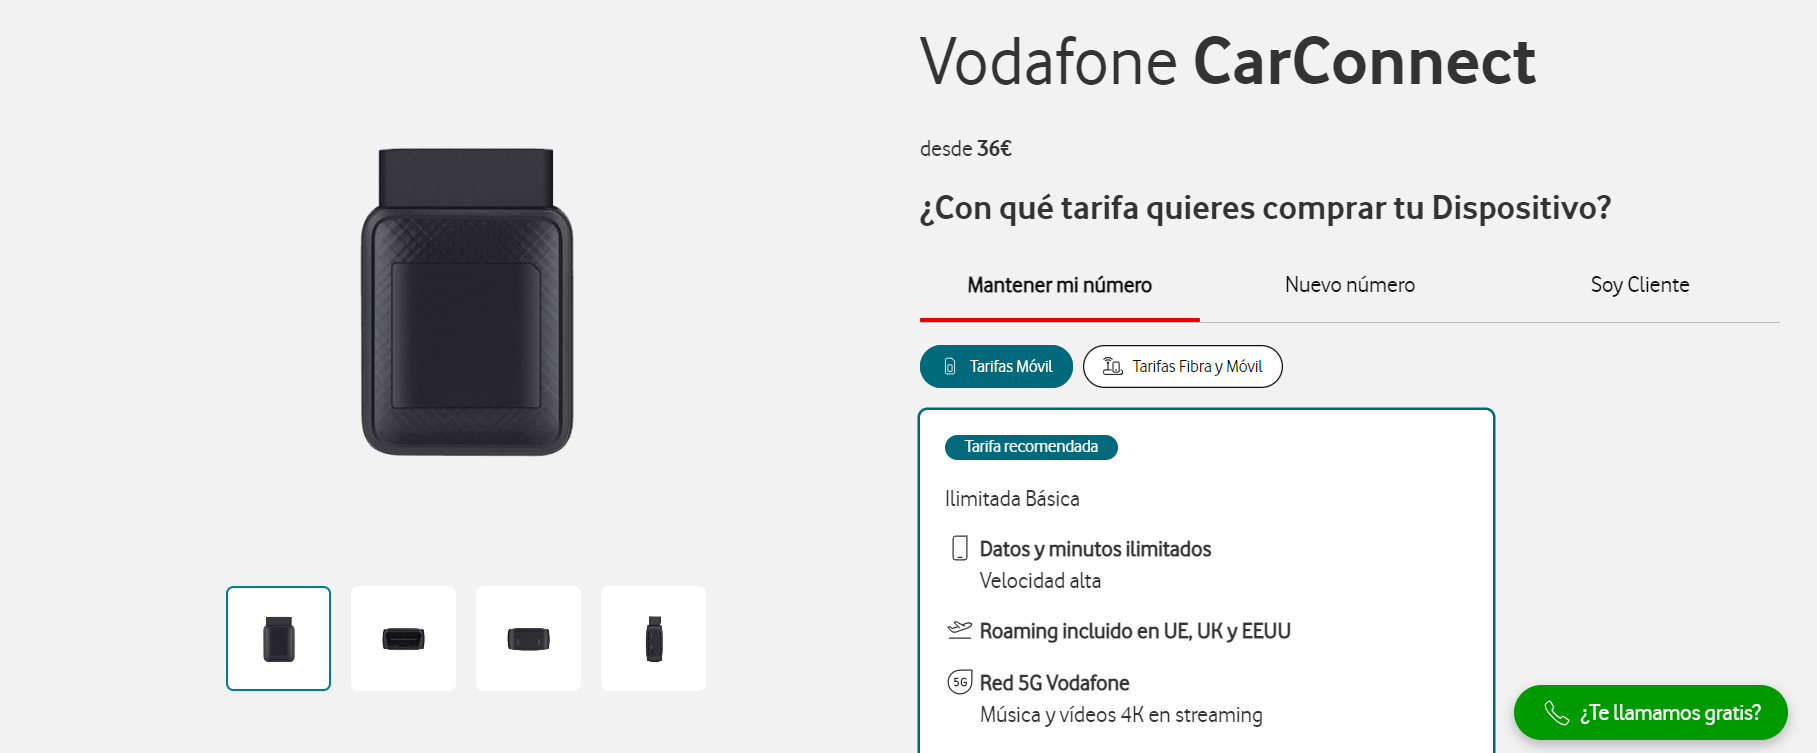 Vodafone carconnect